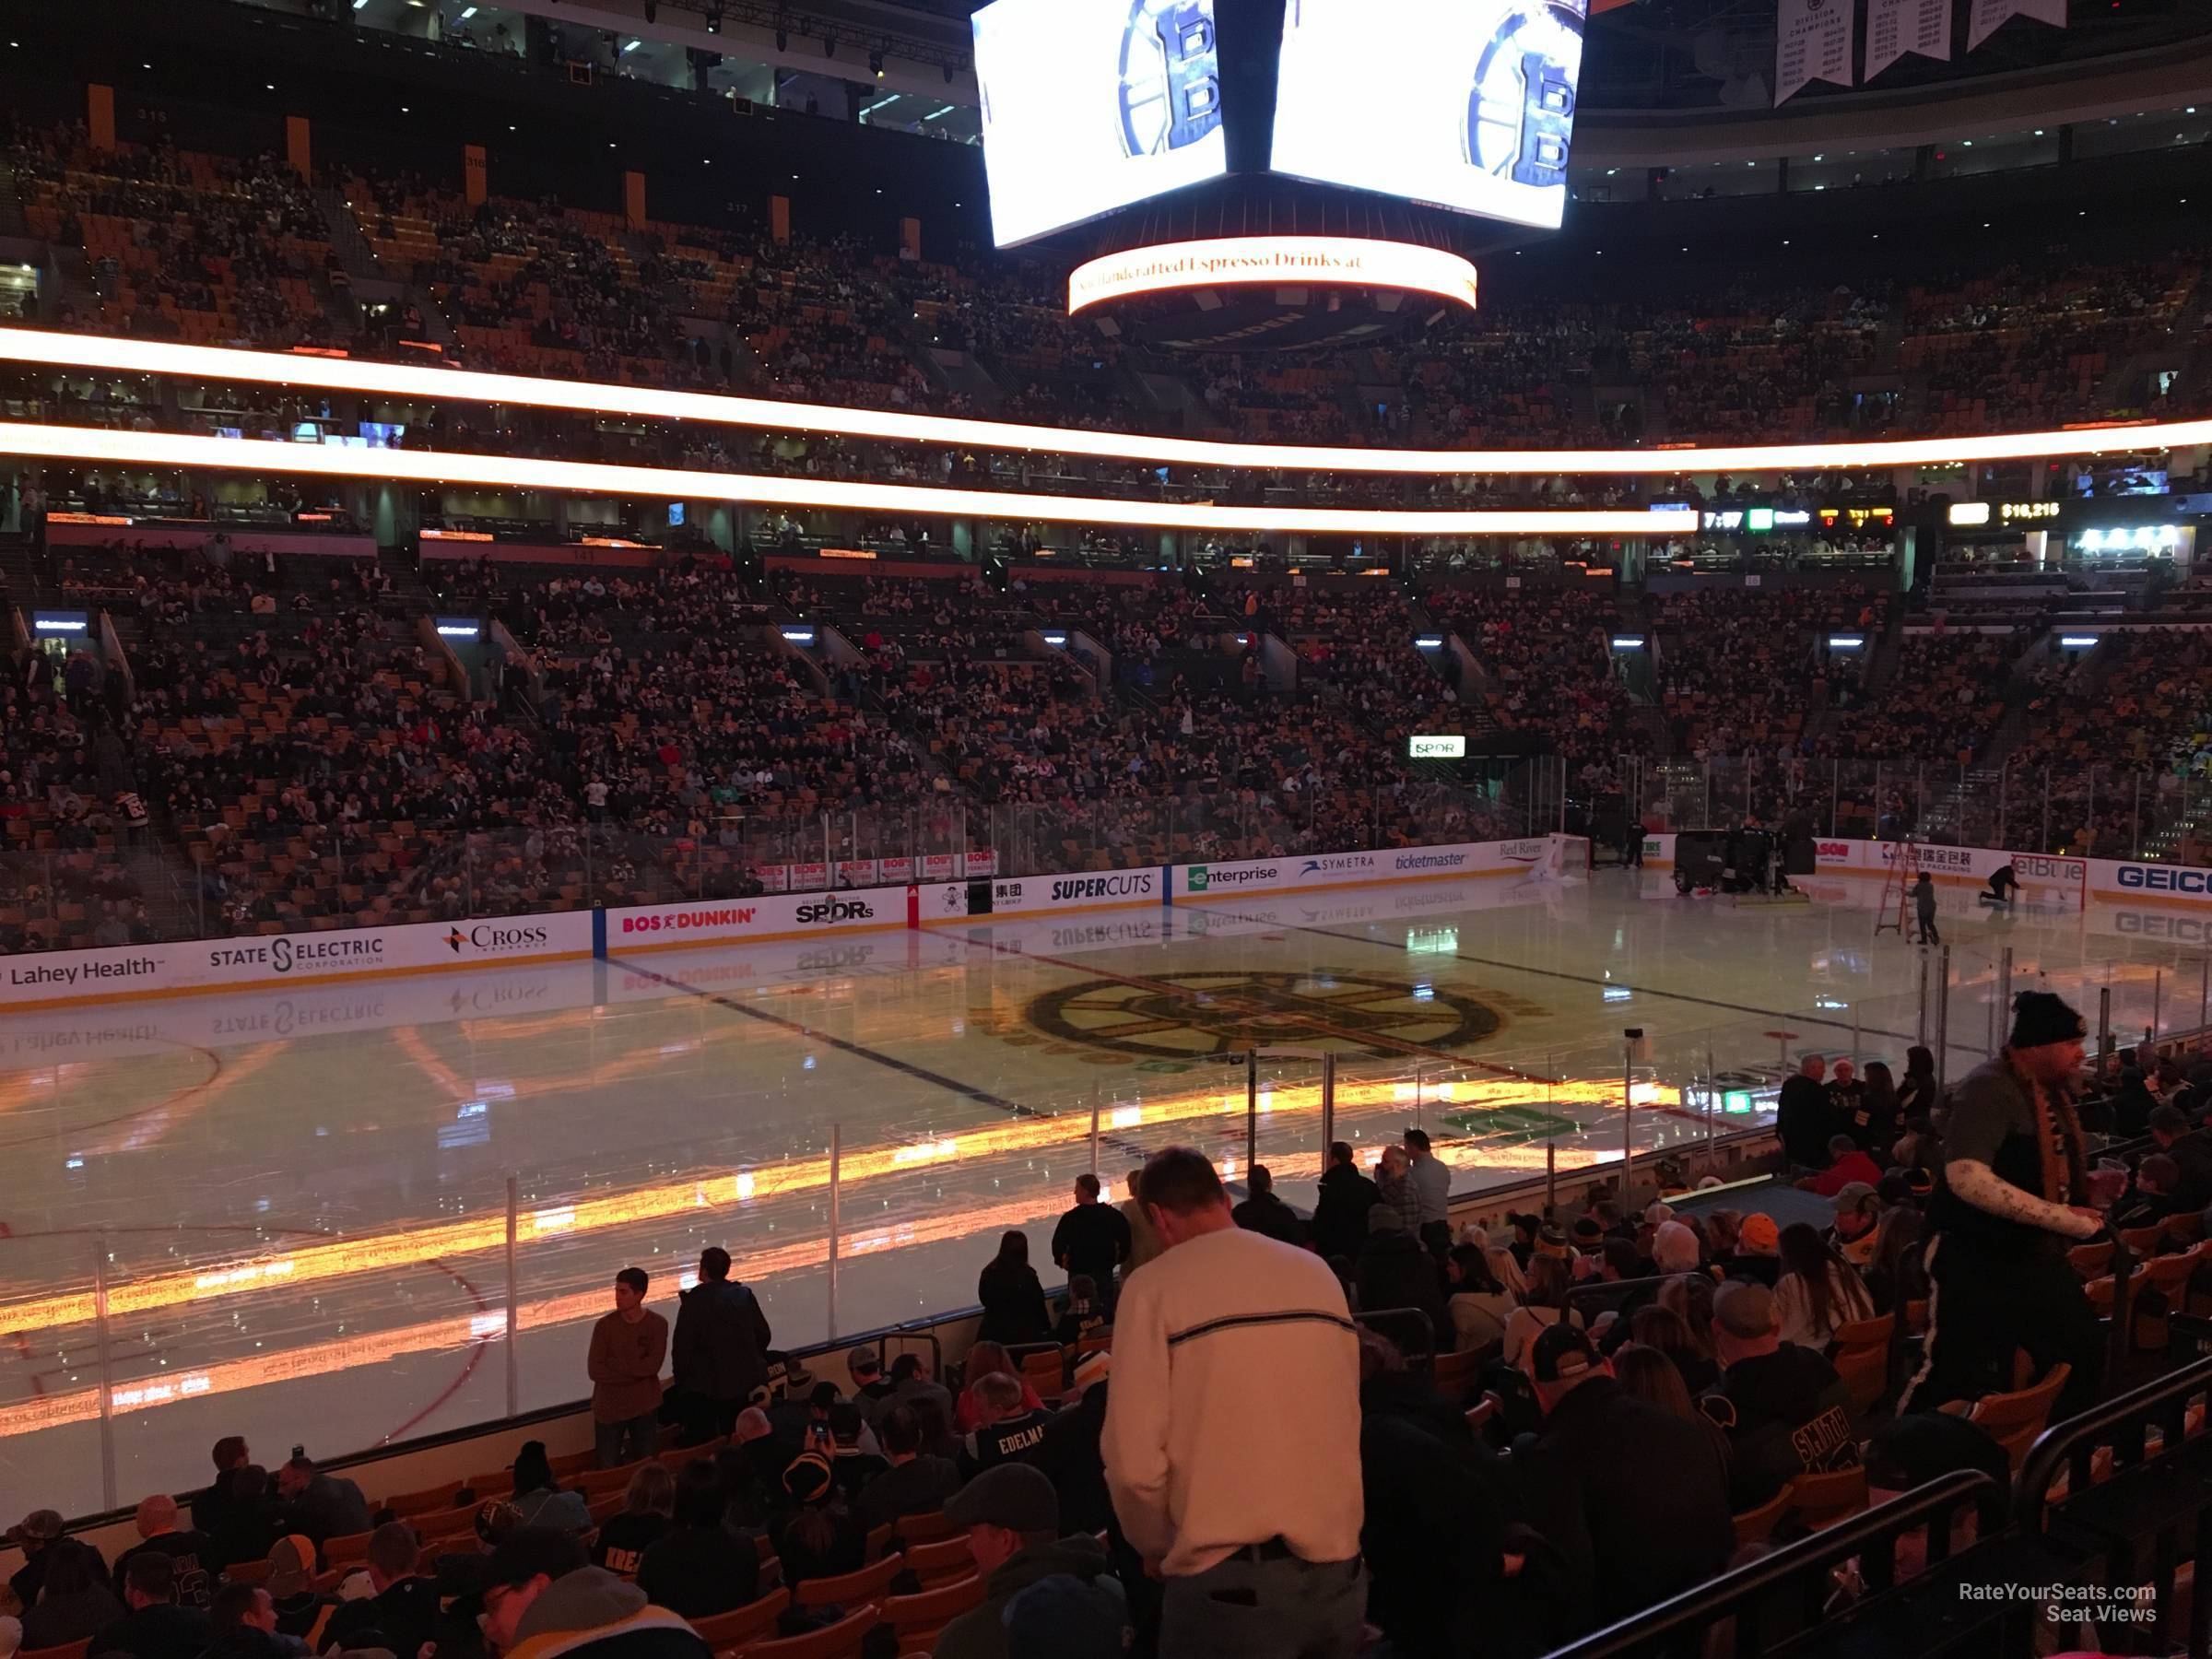 loge 3, row 15 seat view  for hockey - td garden